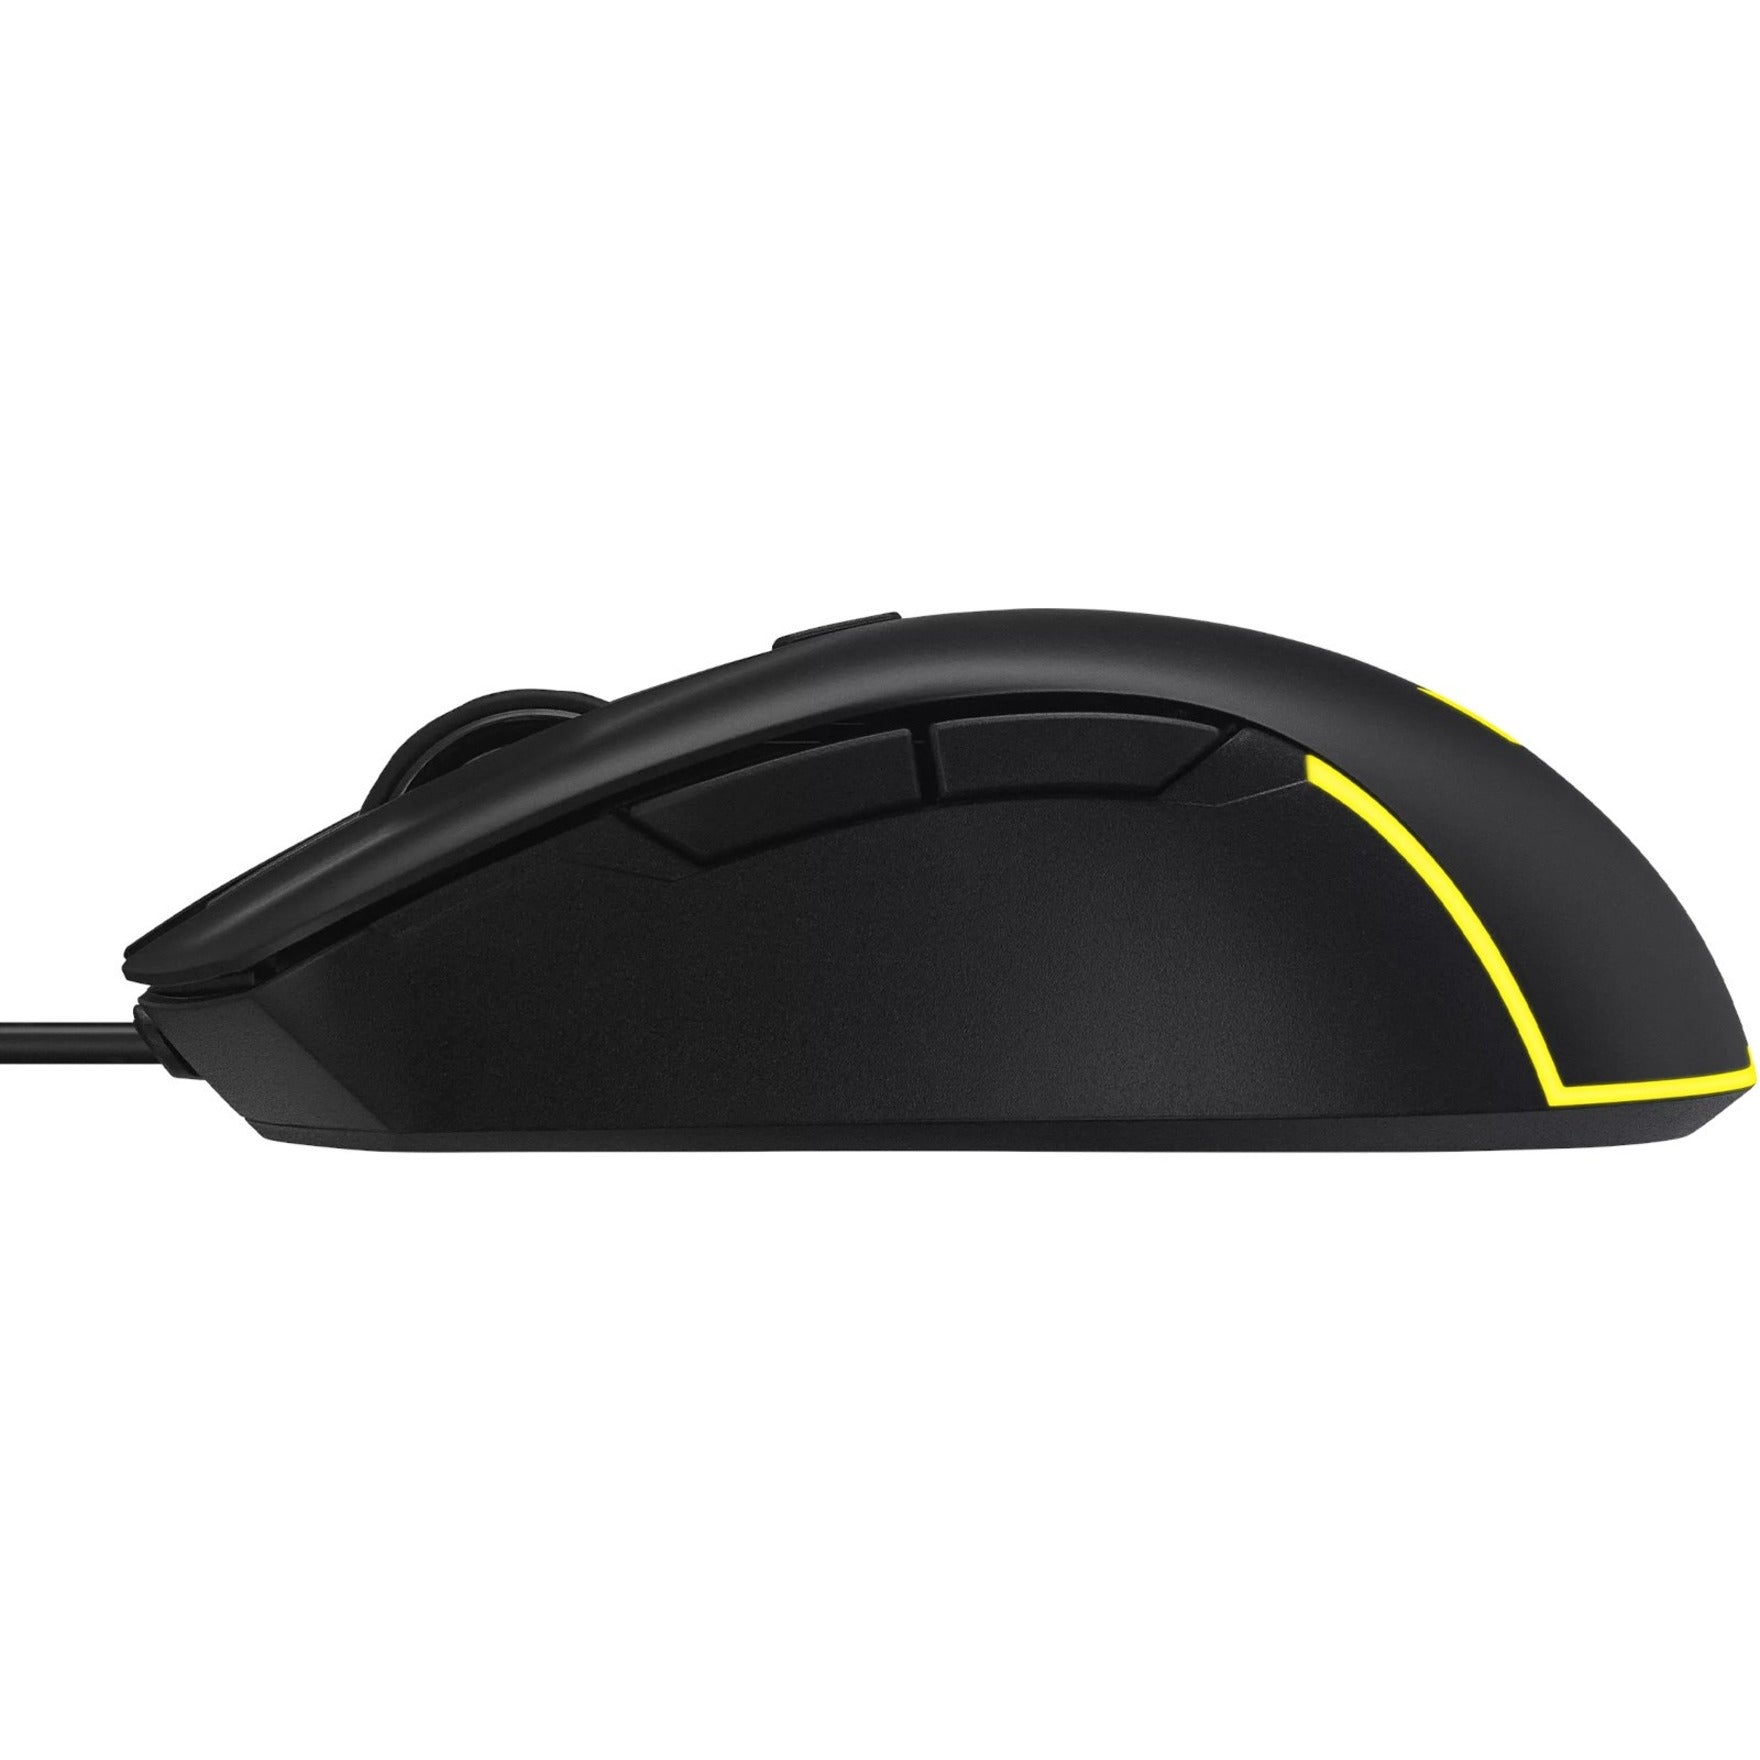 TUF P309 TUF GAMING M3 GEN II Gaming Mouse, Ergonomic Fit, 8000 DPI, 6 Programmable Buttons